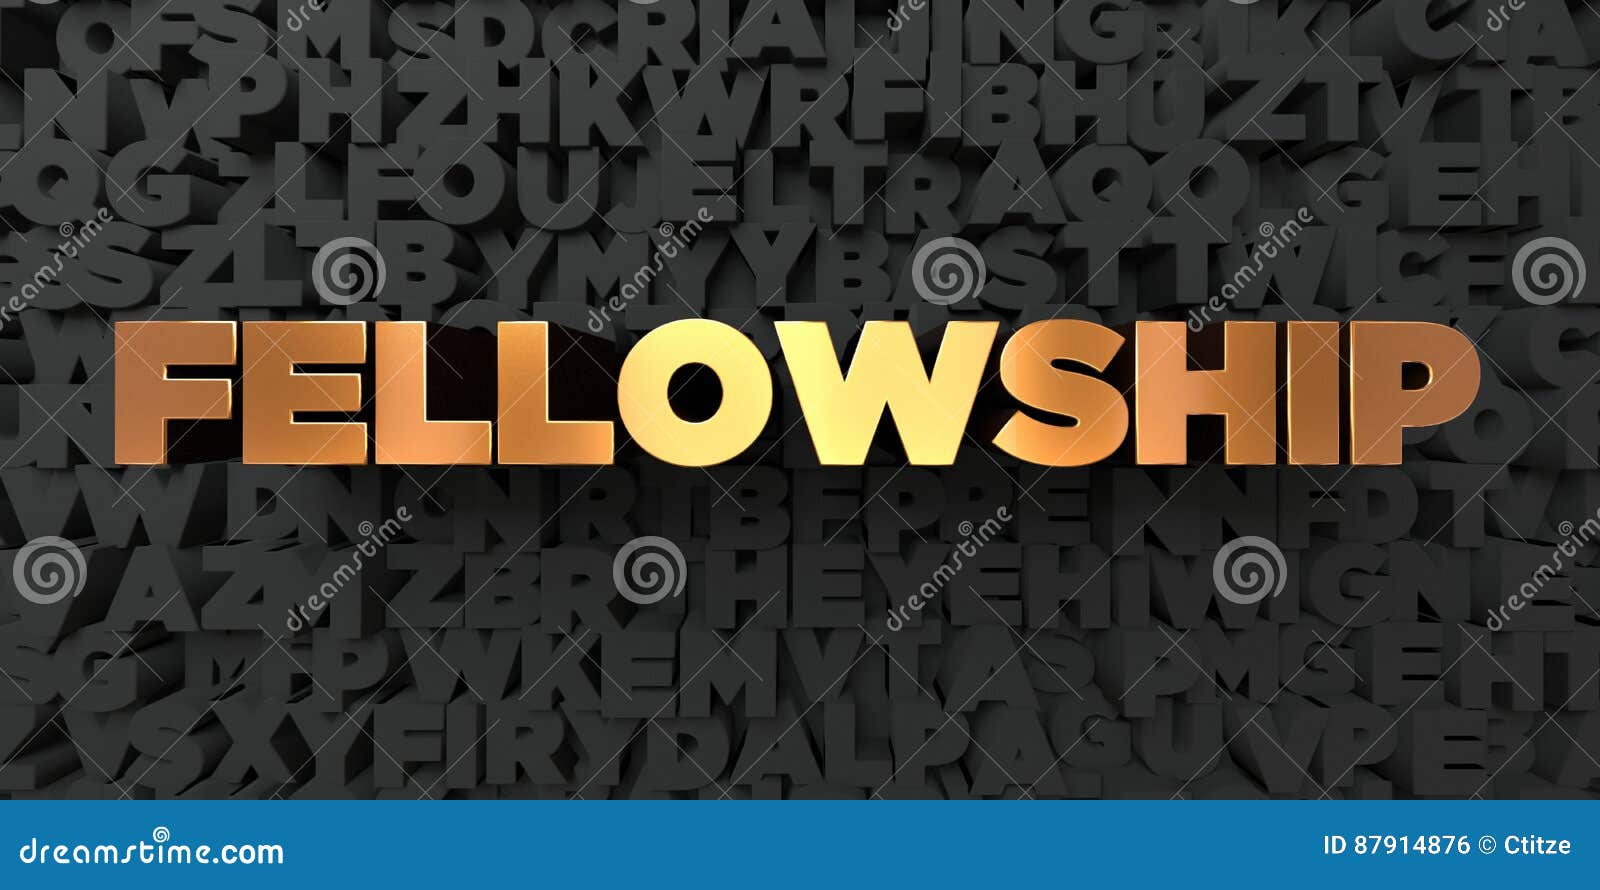 fellowship - gold text on black background - 3d rendered royalty free stock picture